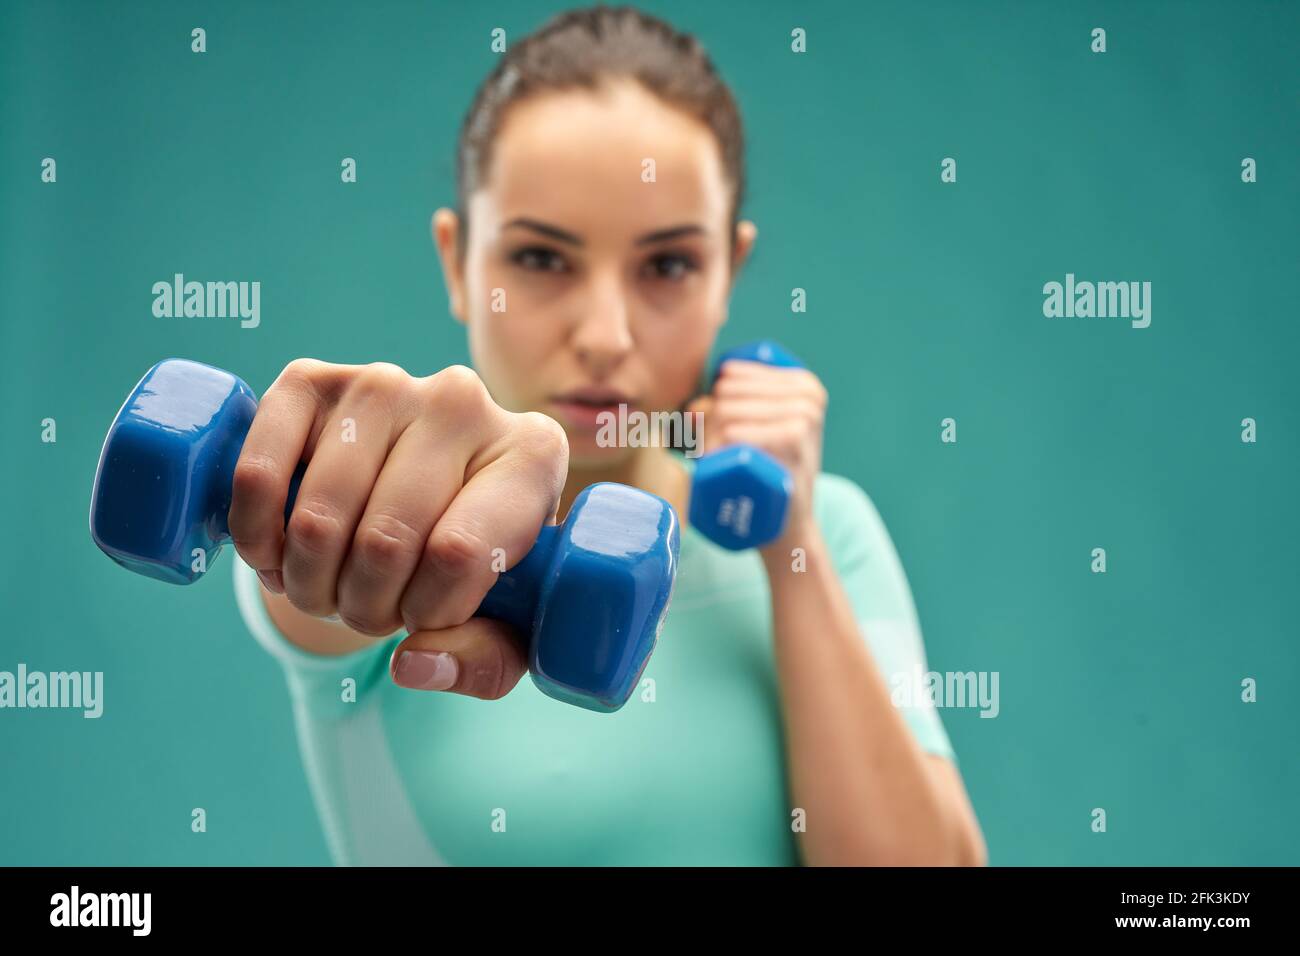 Charming young woman doing exercise with dumbbells Stock Photo